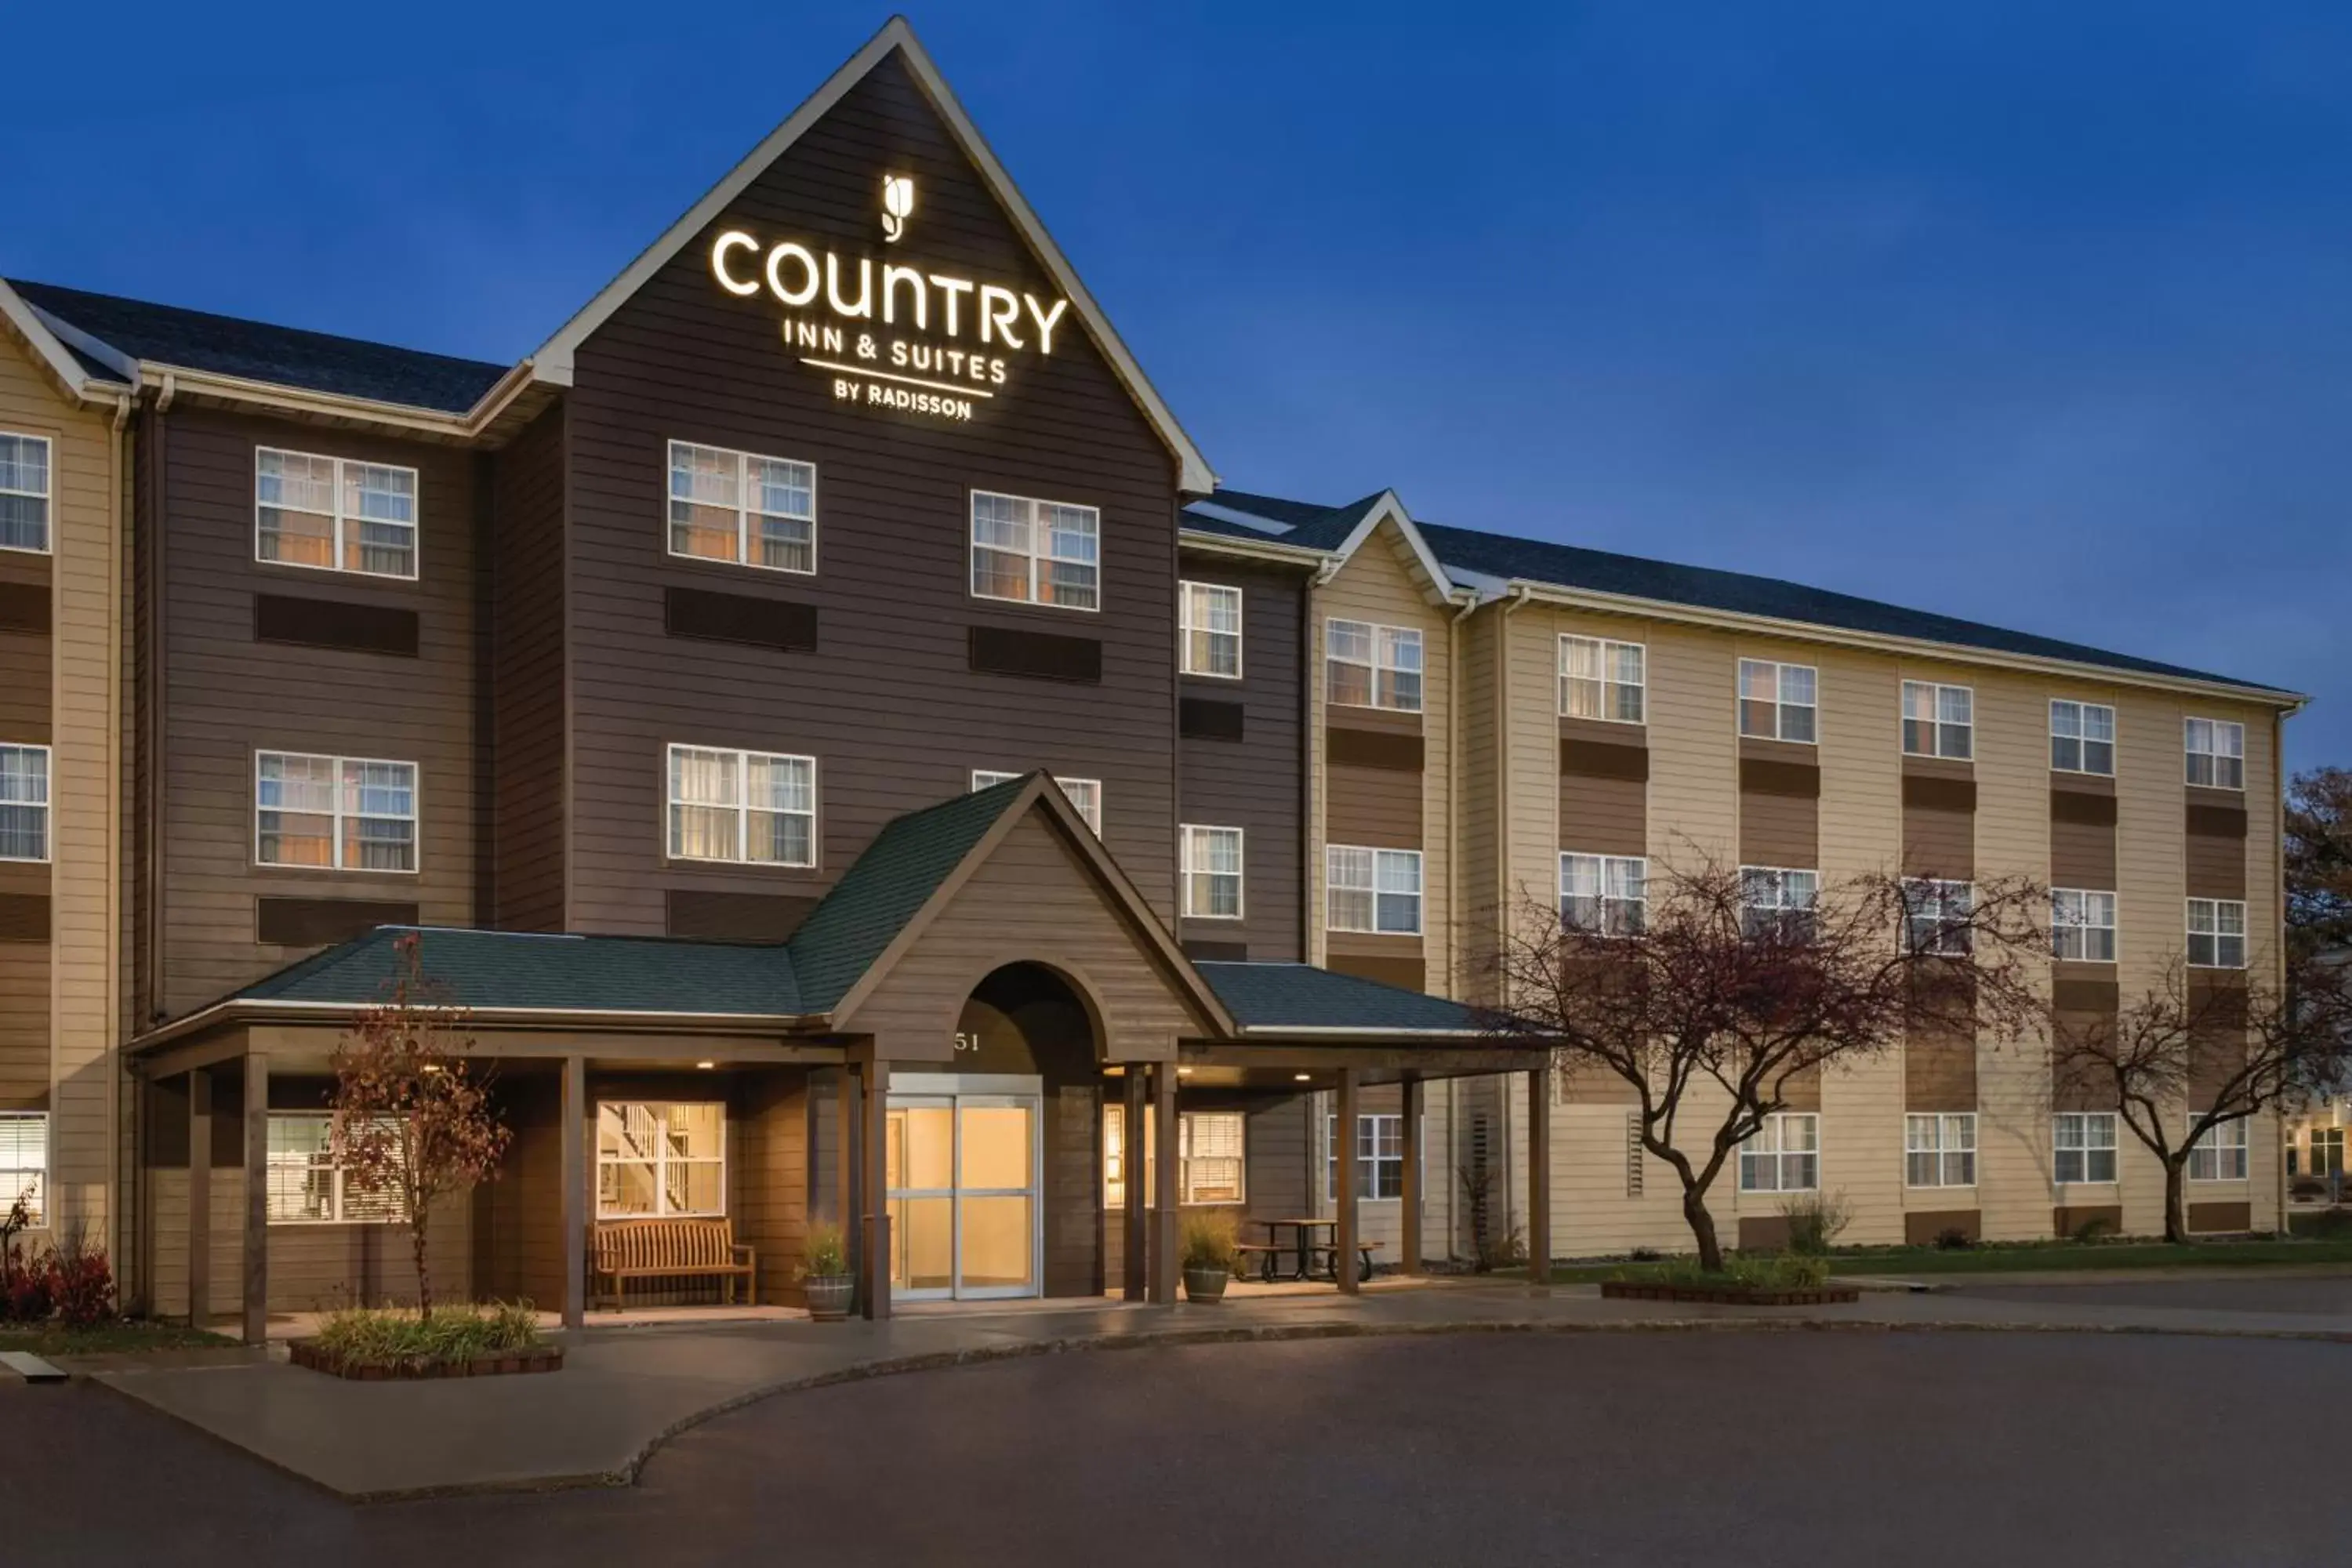 Property Building in Country Inn & Suites by Radisson, Dakota Dunes, SD